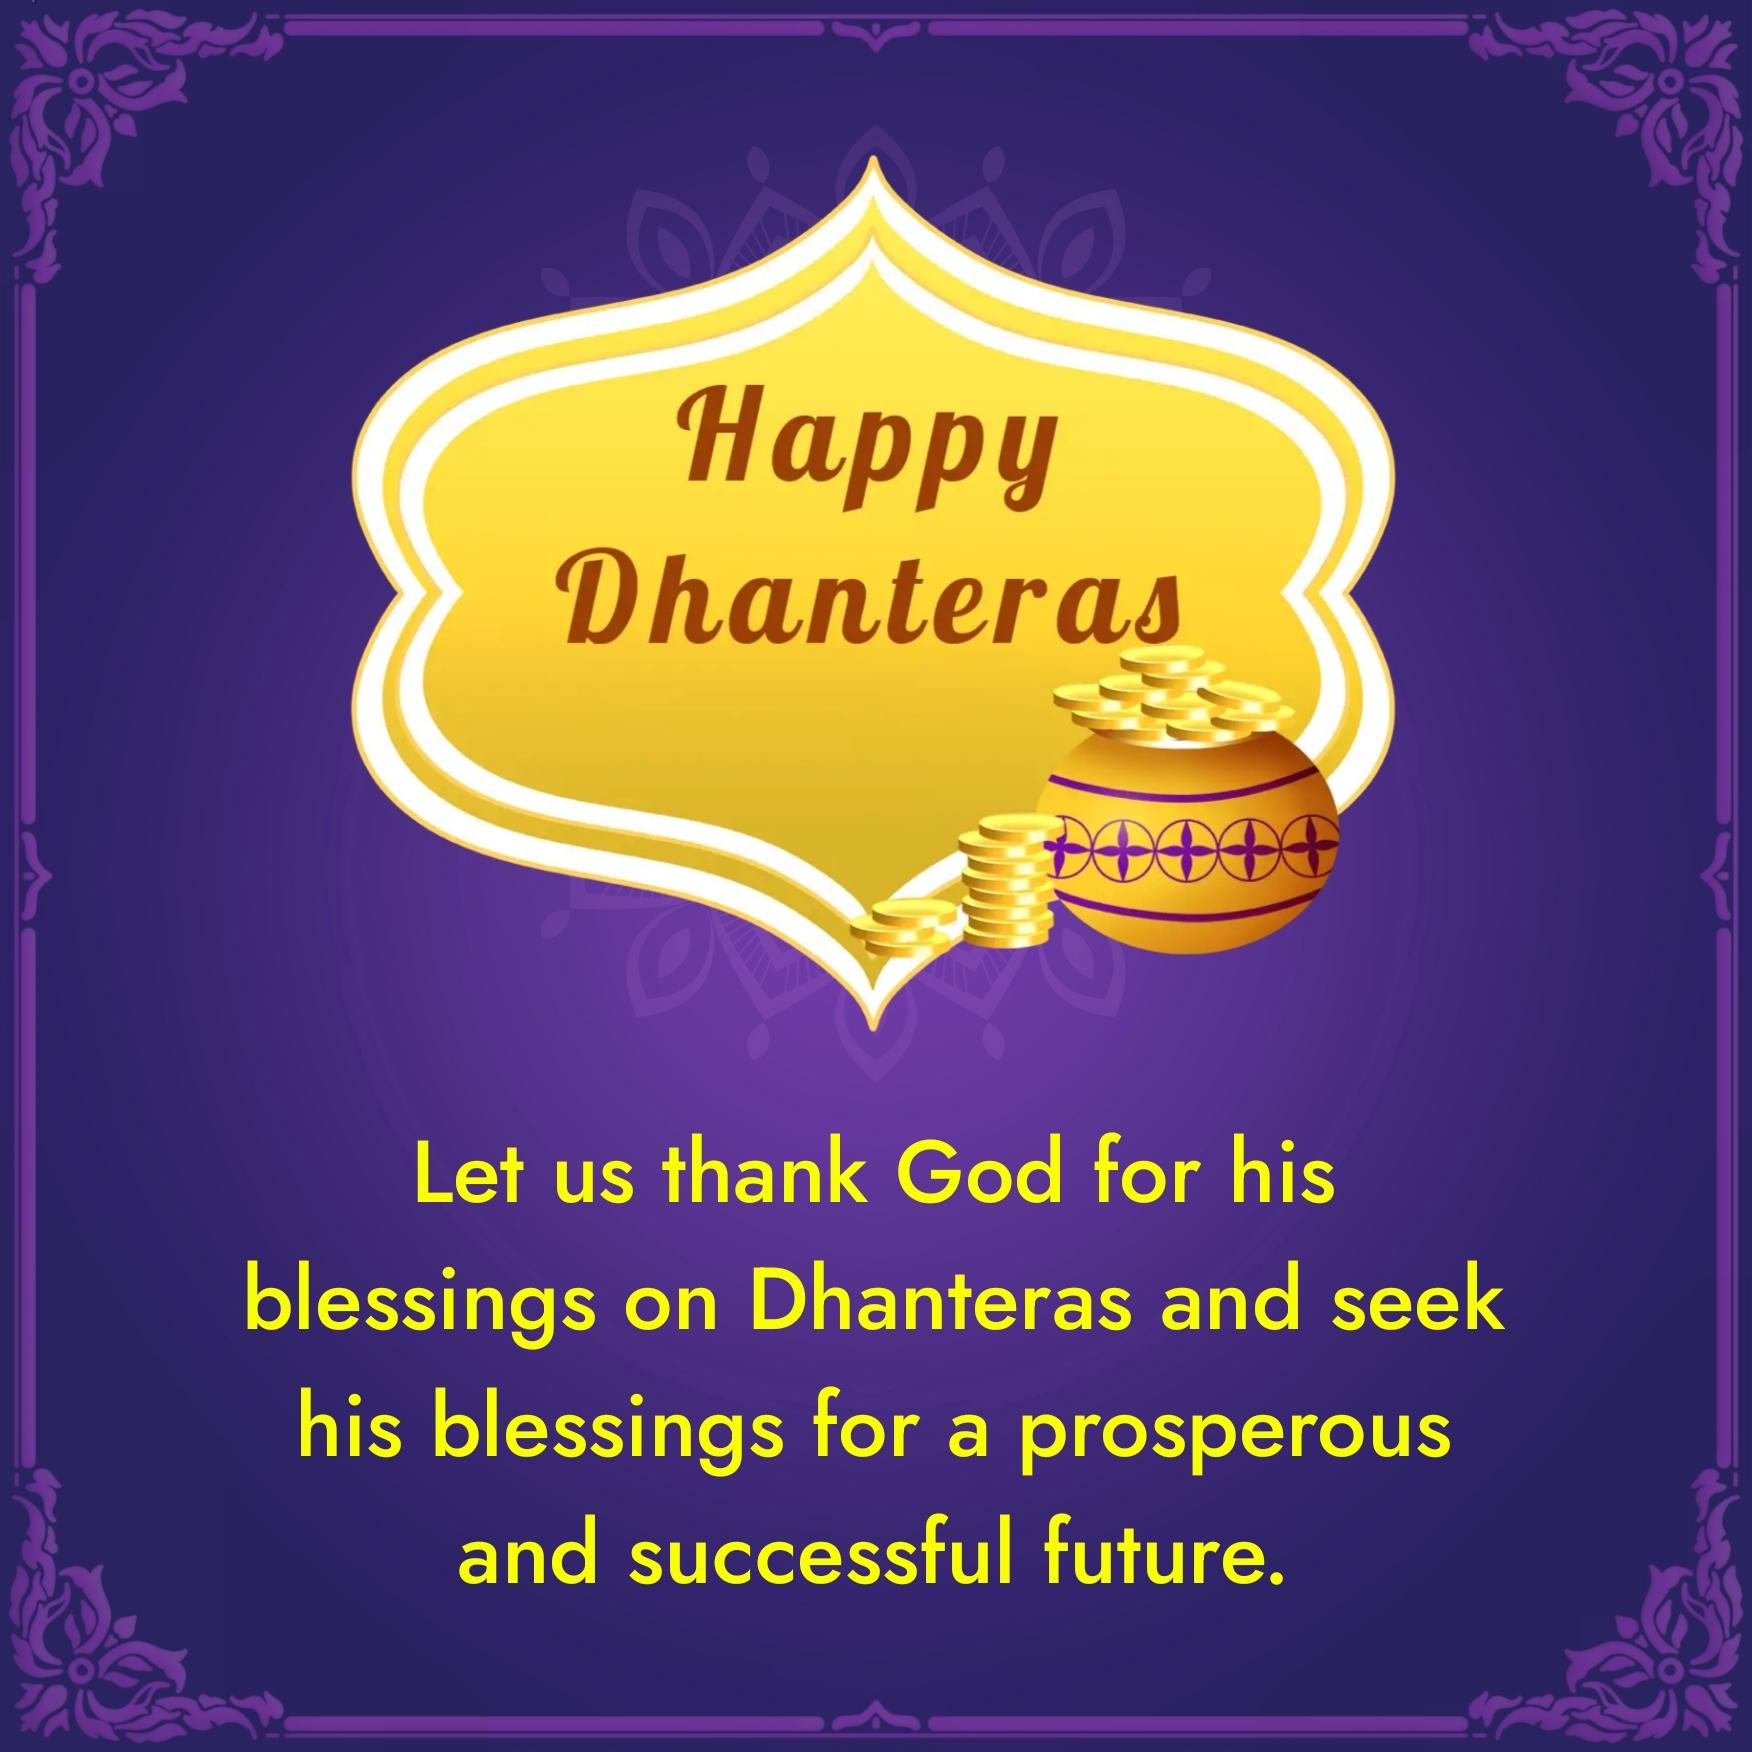 Let us thank God for his blessings on Dhanteras